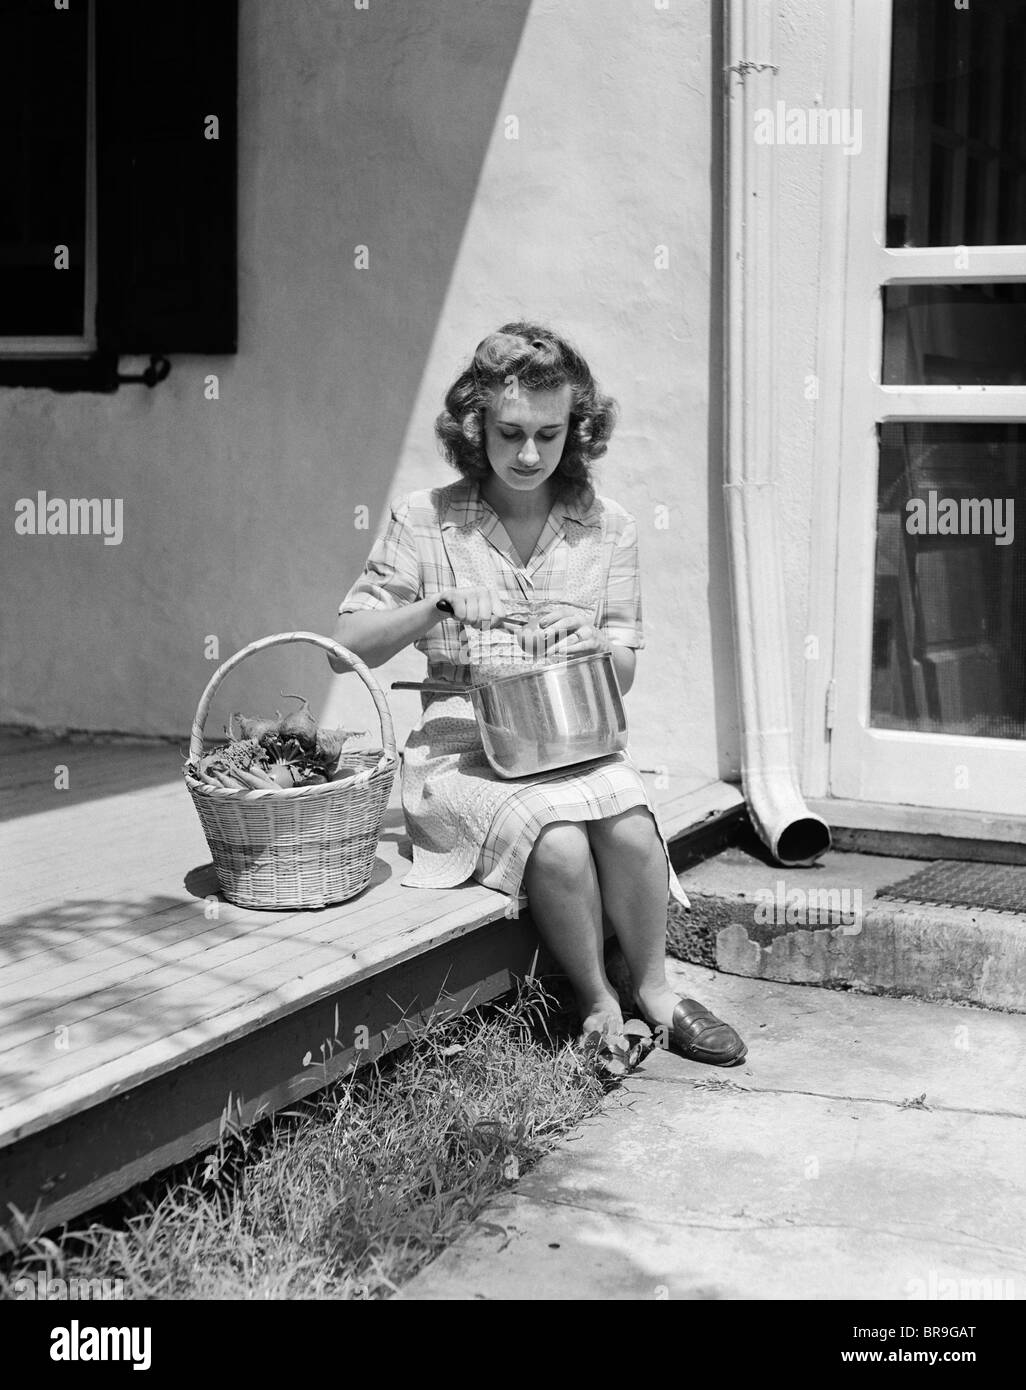 1940s WOMAN WEARING PLAID DRESS AND APRON SITTING ON PORCH OF FARMHOUSE WITH BASKET OF VEGETABLES PEELING TOMATO OVER POT Stock Photo